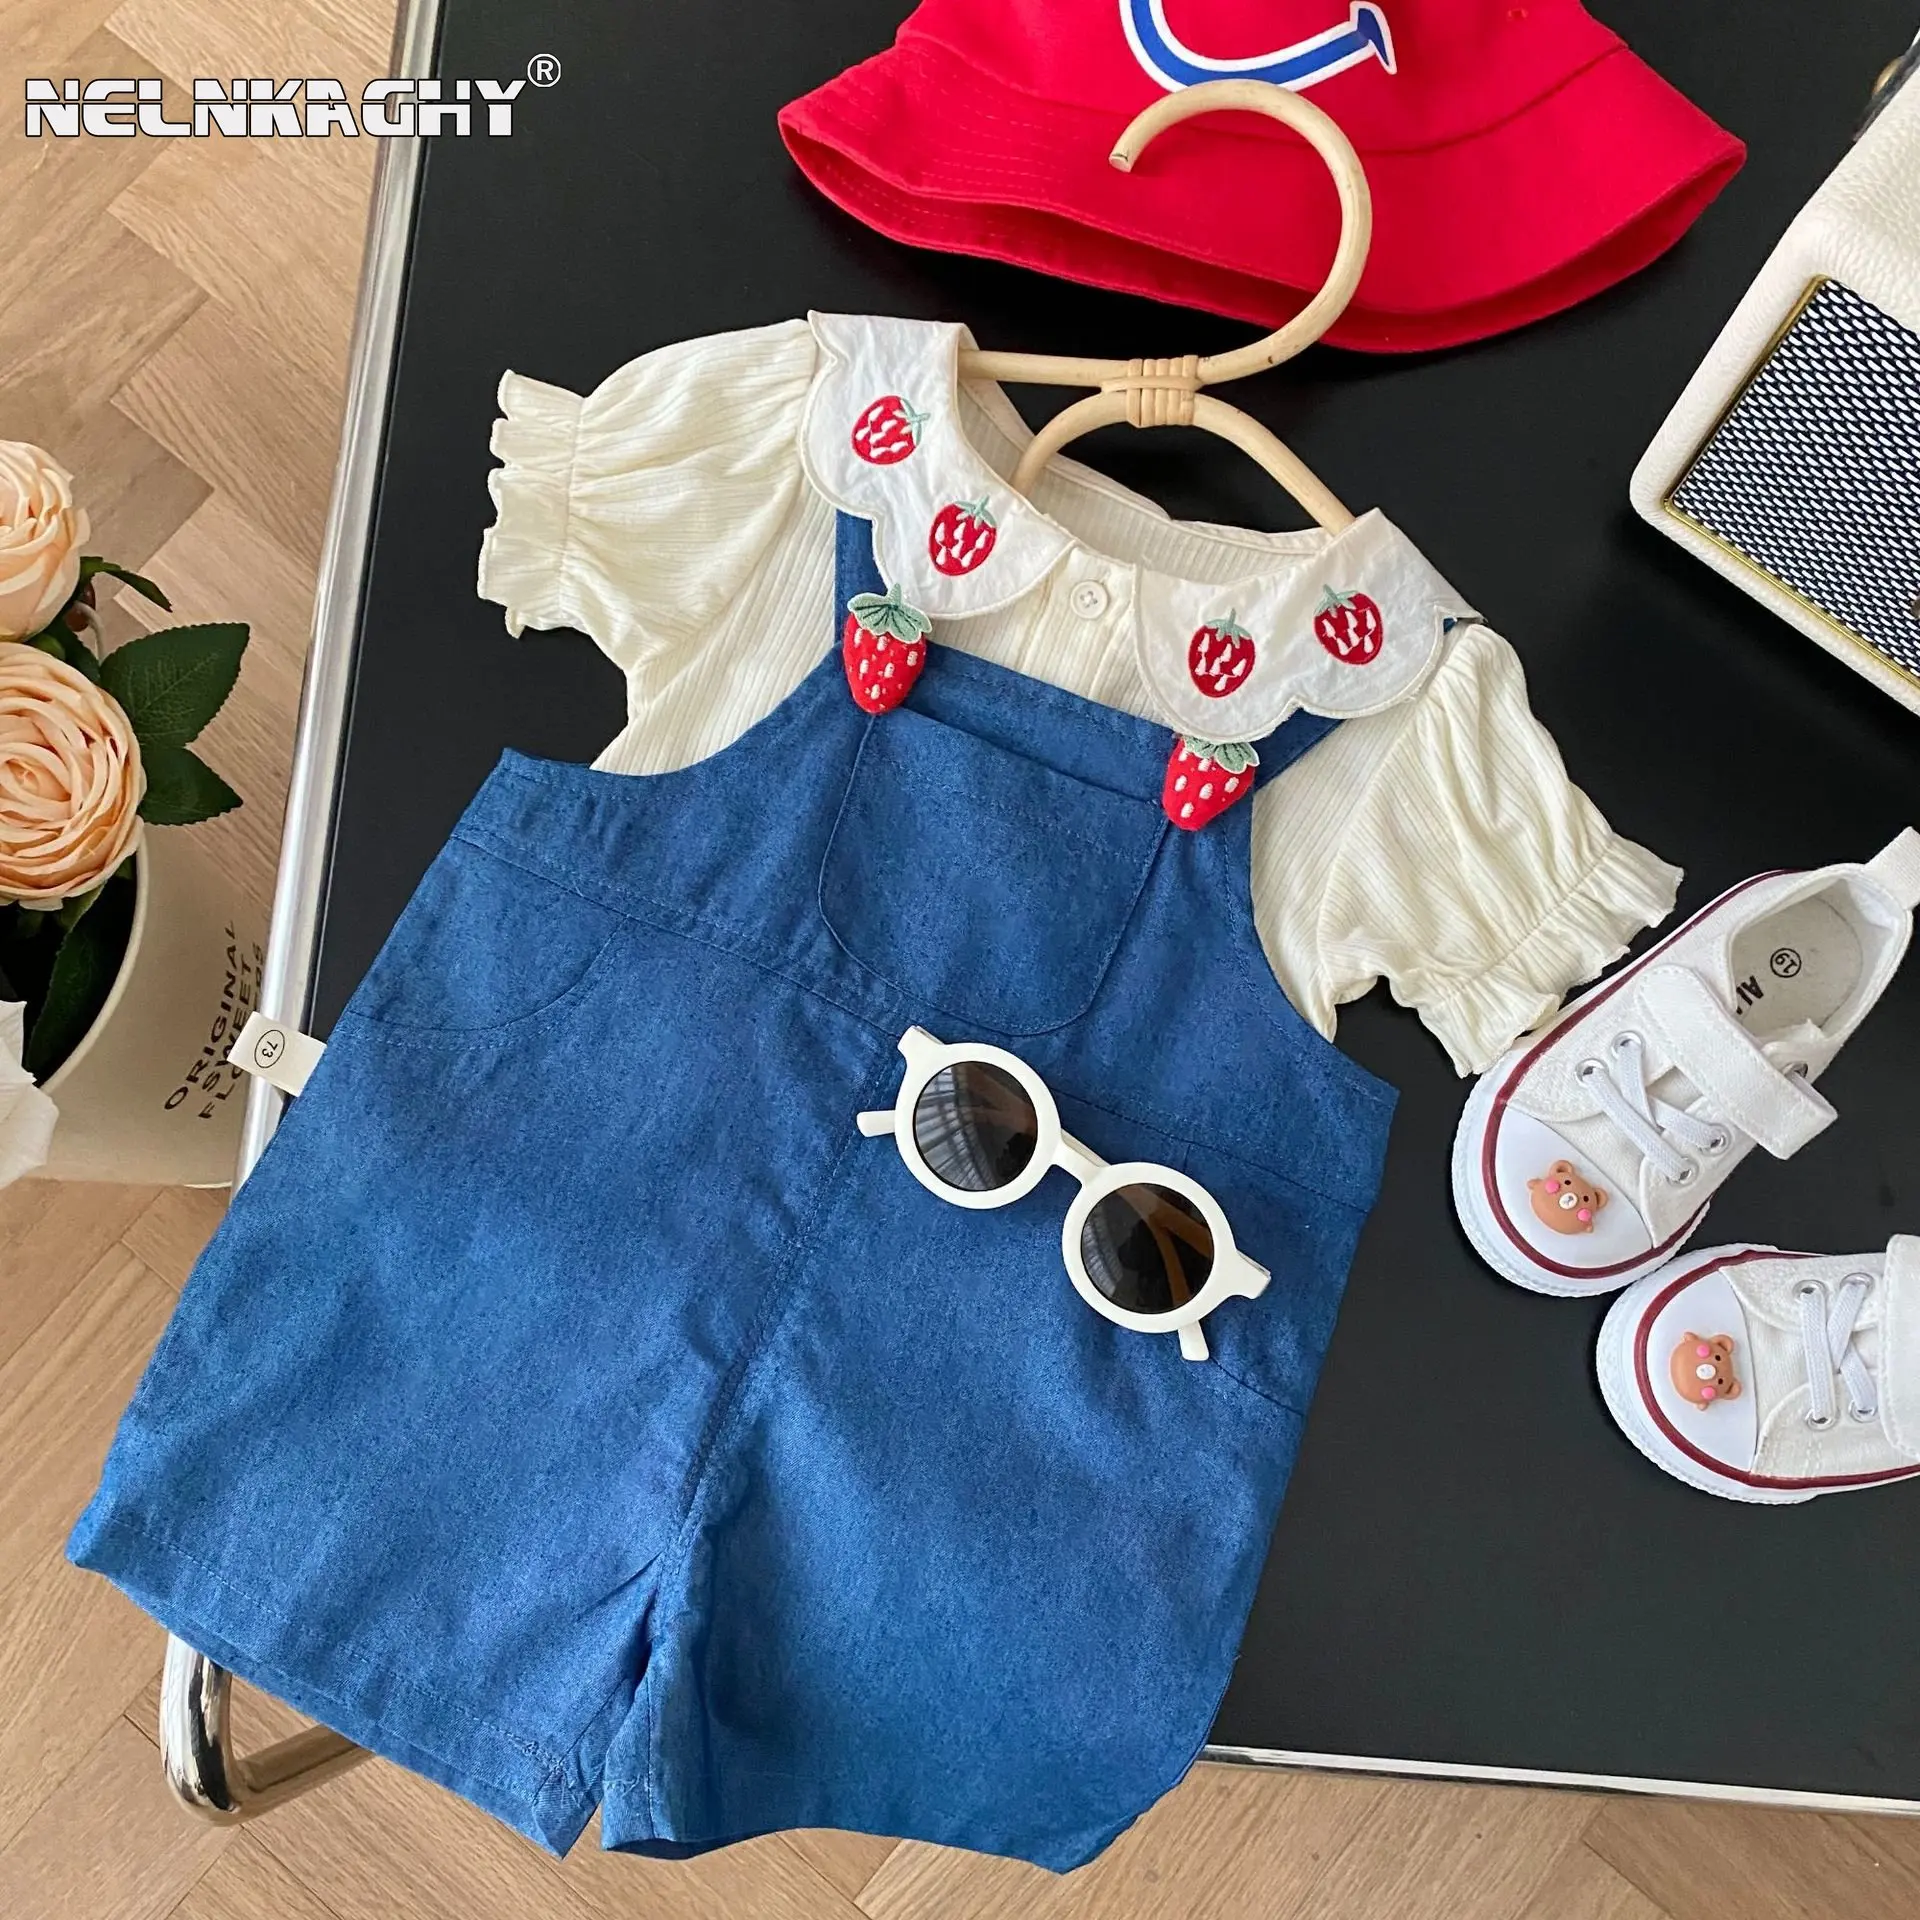 

2023 Summer New In Kids Baby Girsl Peter Pan Collar Embroidery Top T-shirts+denim Overalls Jumpsuits Children Clothes Set 2pcs